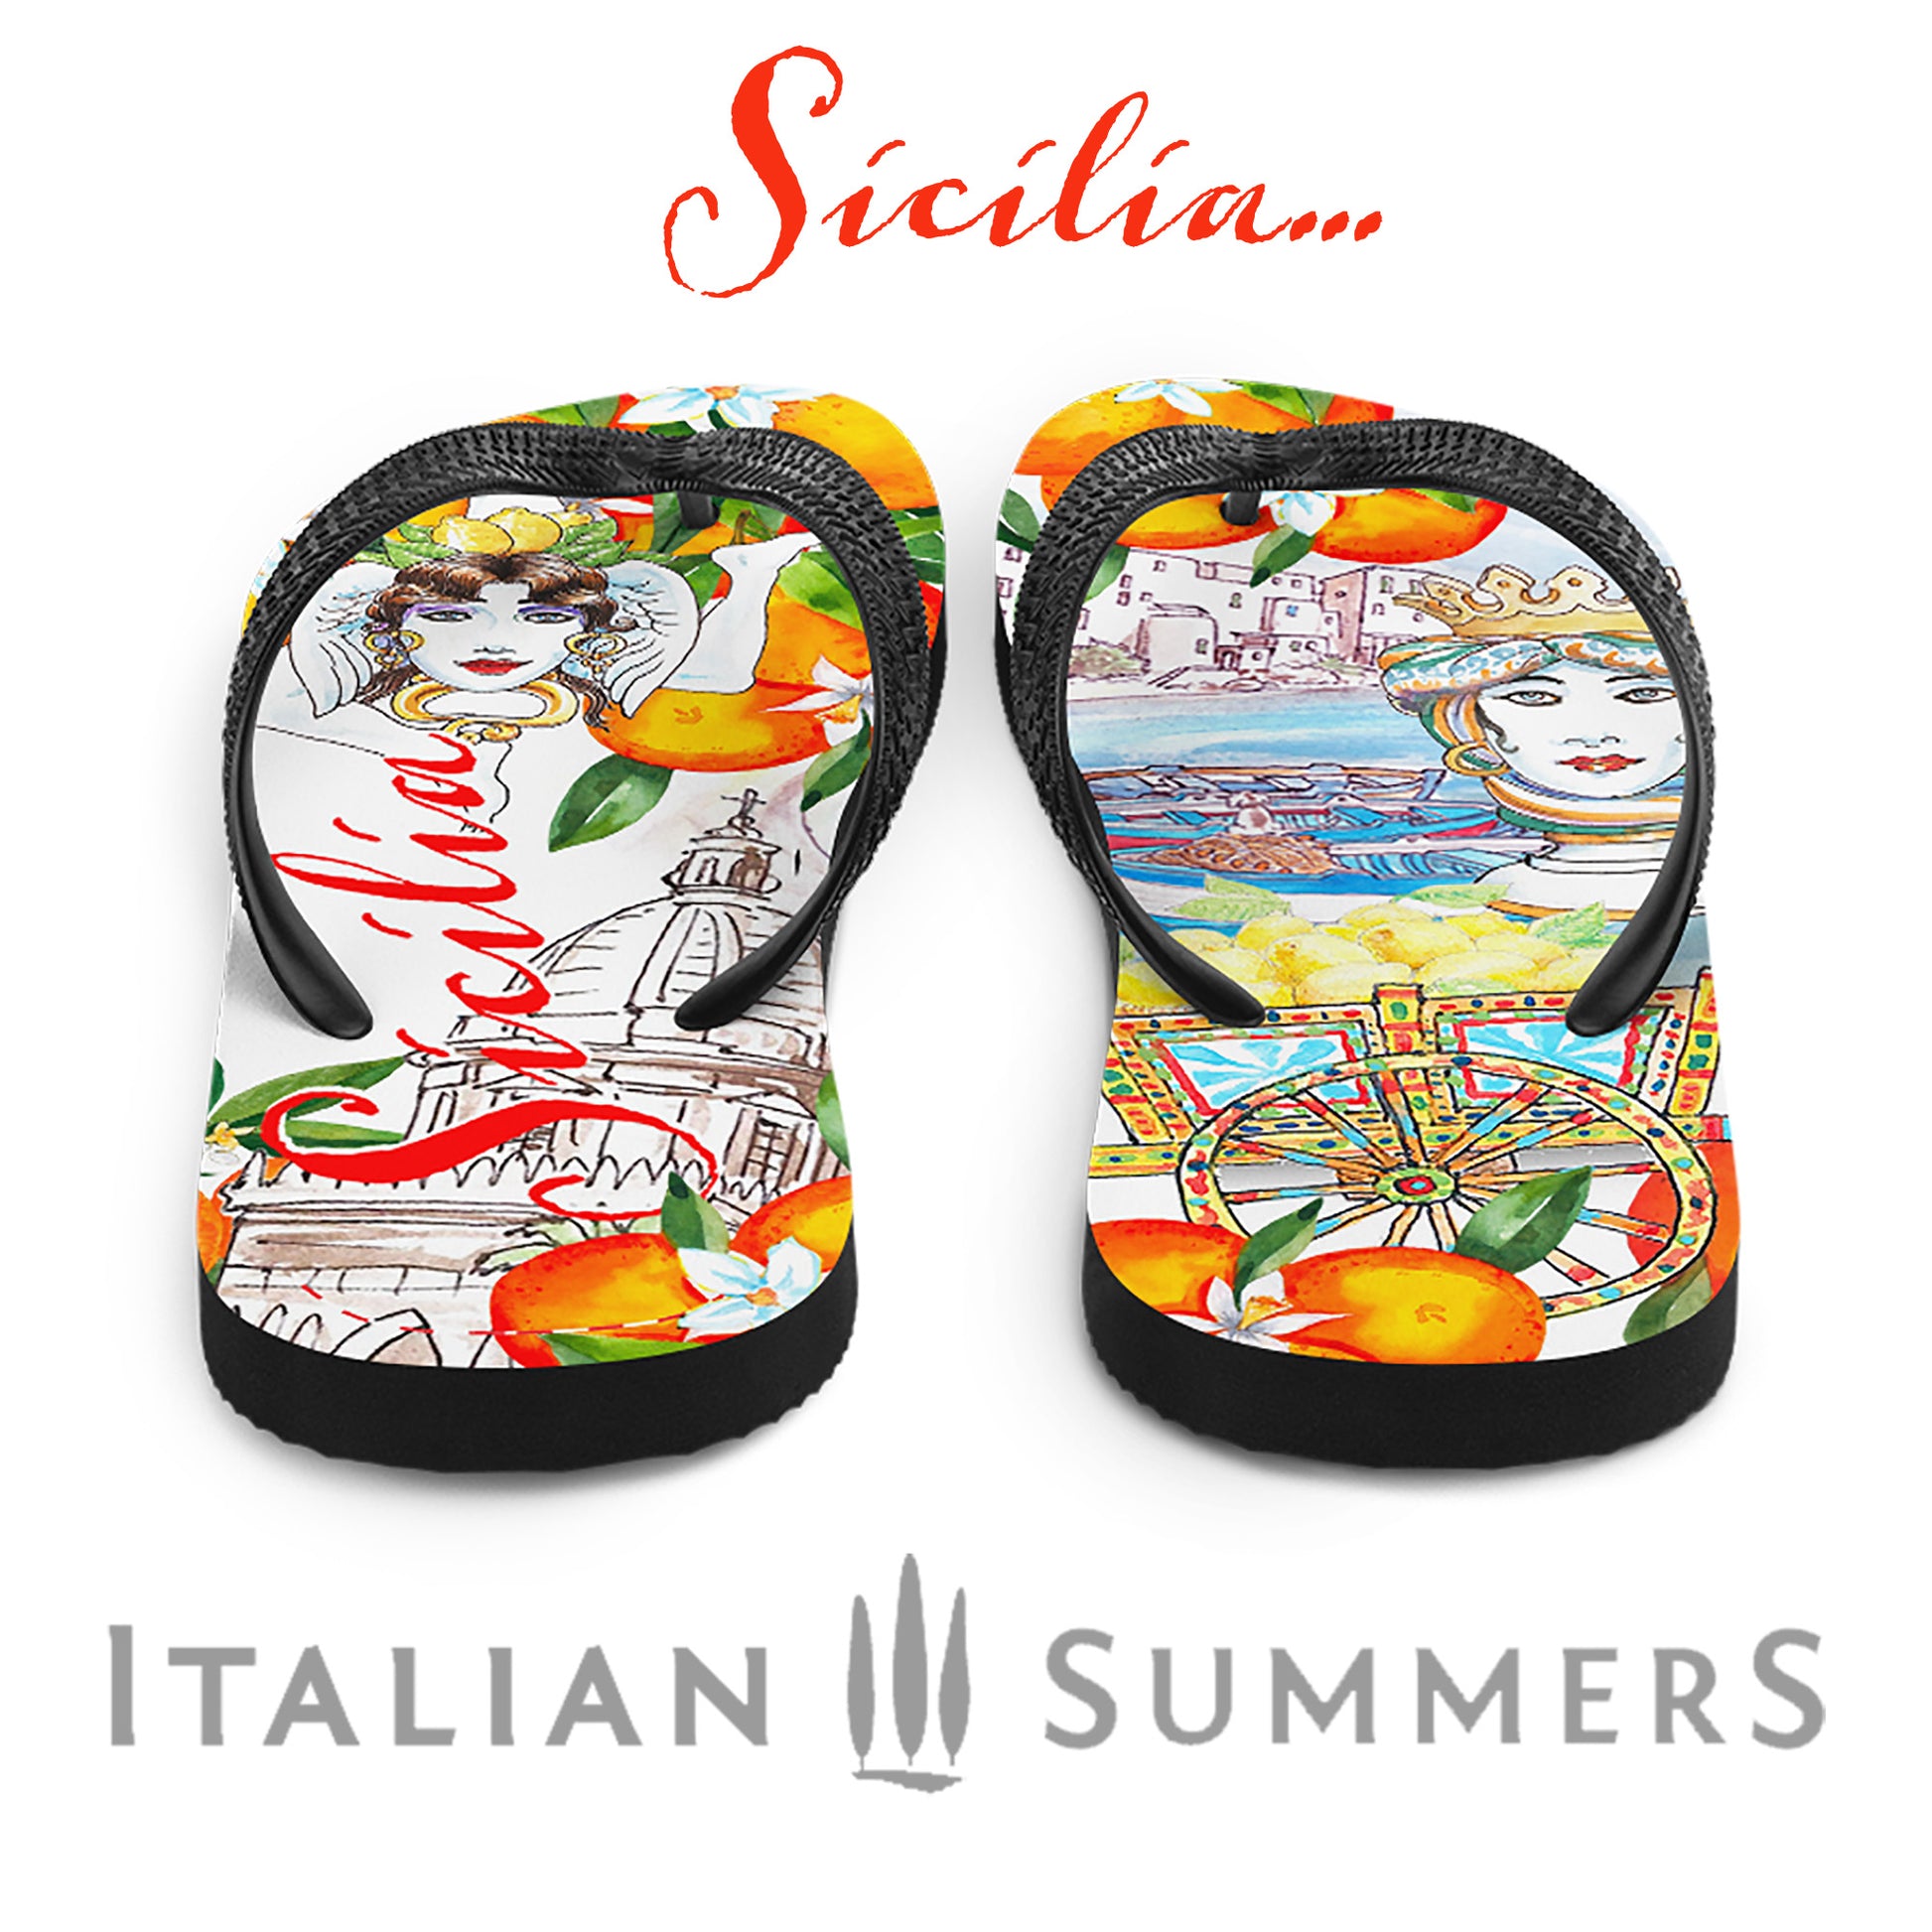 Feel the Mediterranean sunshine on your feet with these Sicily-inspired flip-flops! Featuring oranges and orange blossoms, plus the word "Sicily" and an iconic carretto siciliano, they're perfect for adding a bit of Italian-style flavor to your summer wardrobe! 